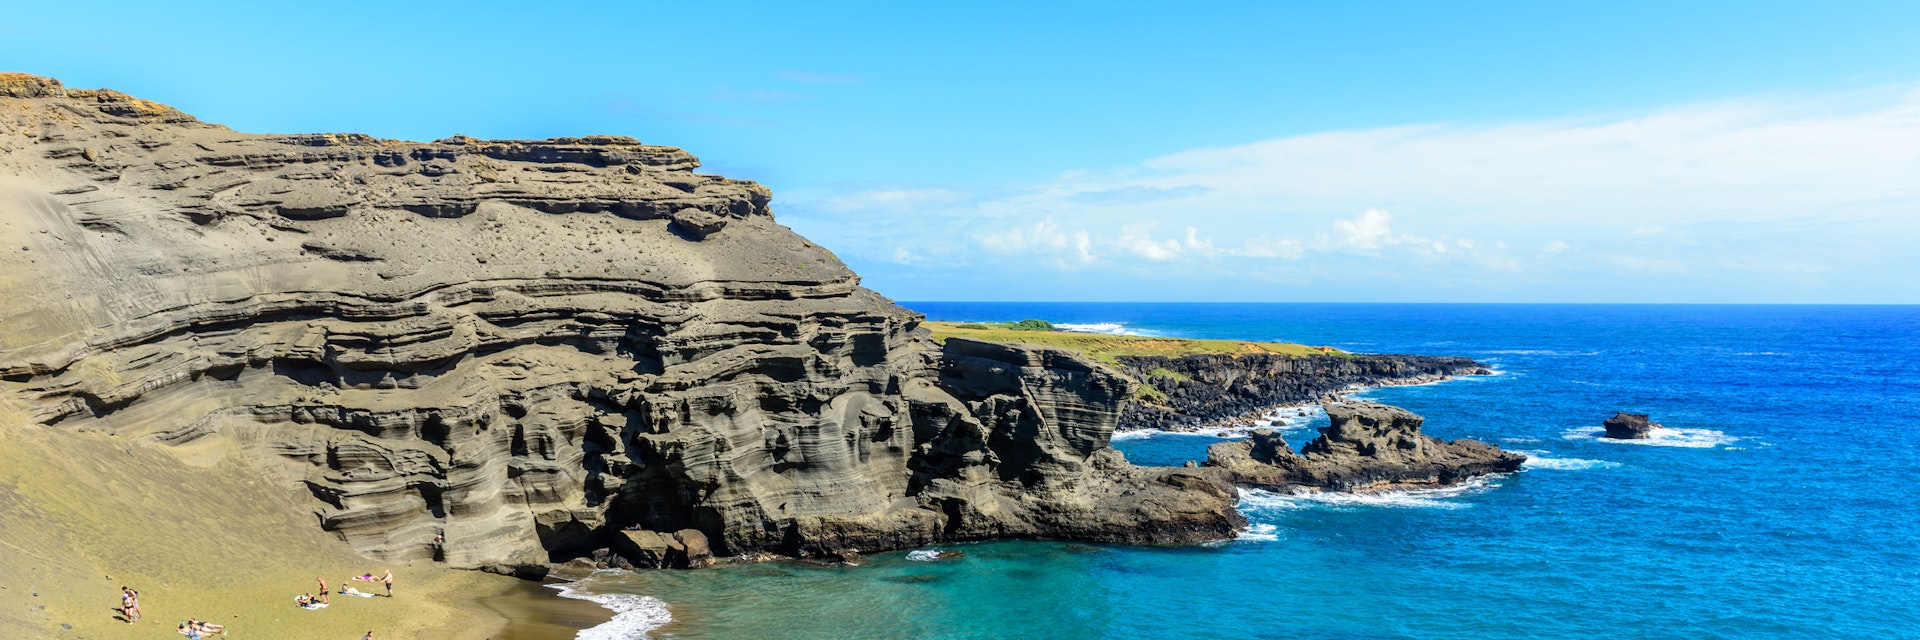 Green sand beach is located near South Point on the island of Hawaii. It is one of the only four green sand beaches in the world.